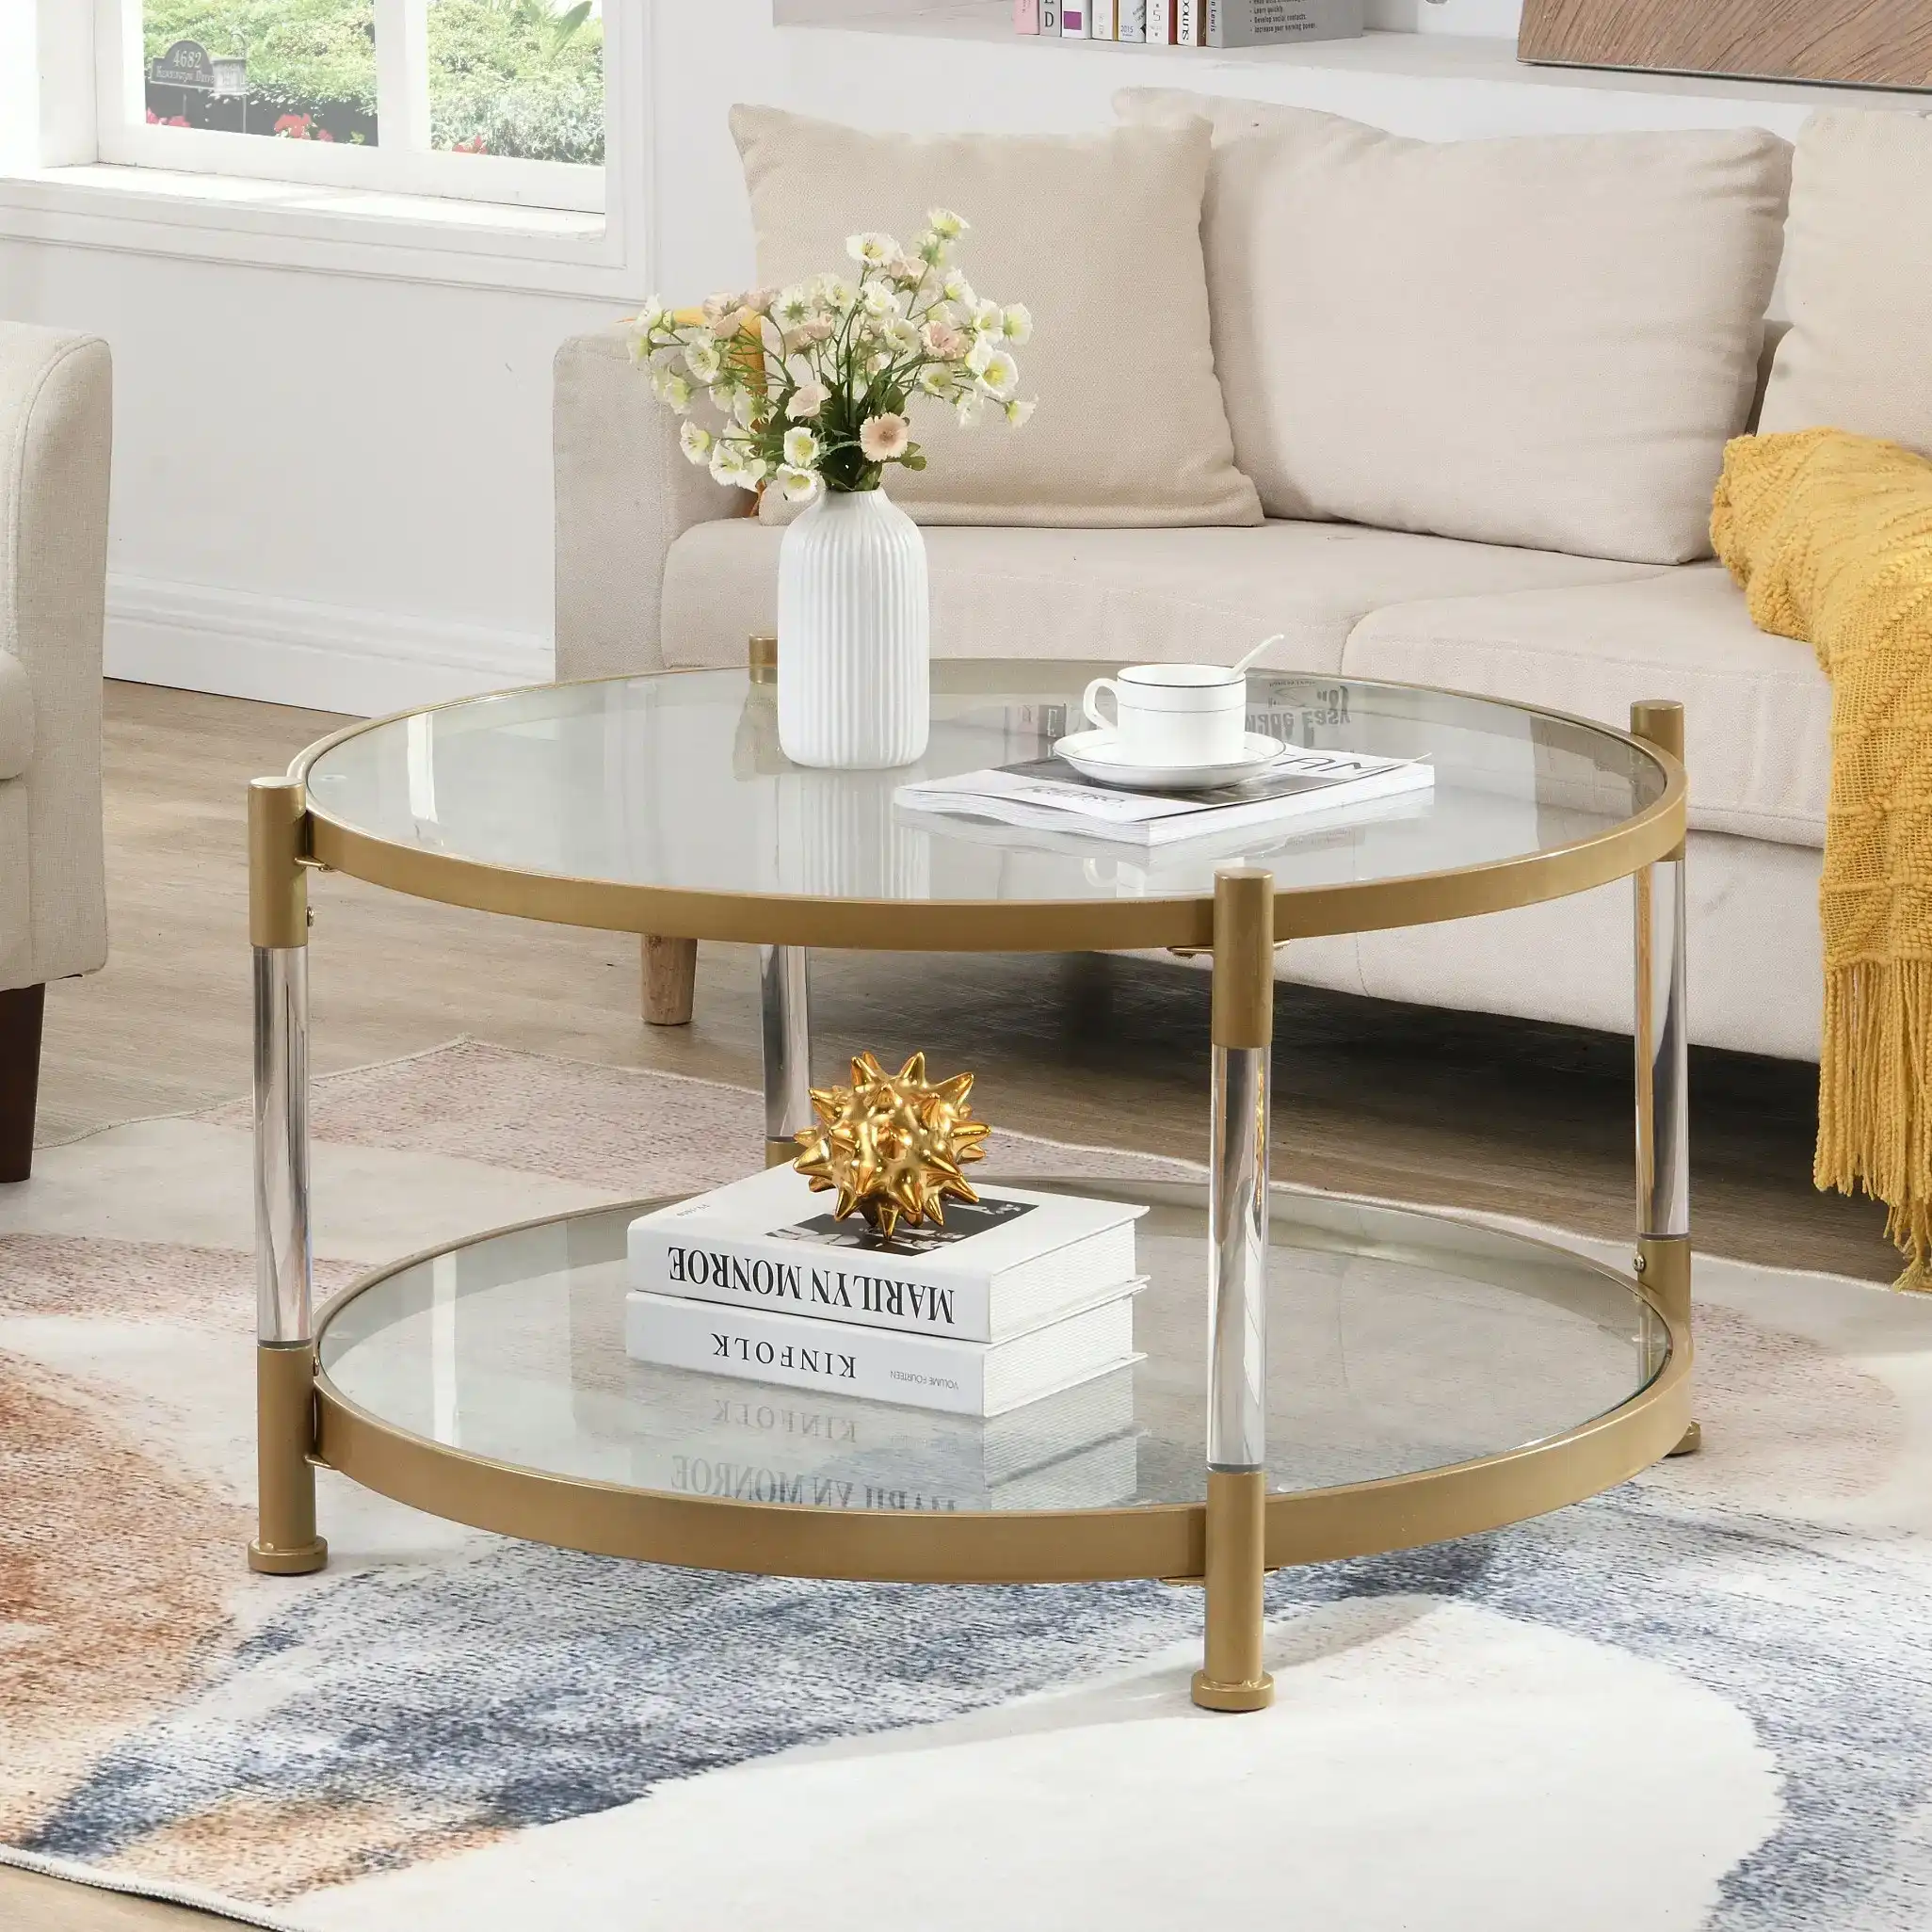 HLIVING Contemporary Acrylic Coffee Table, 82cm Round Tempered Glass Coffee Table, Gold Finish